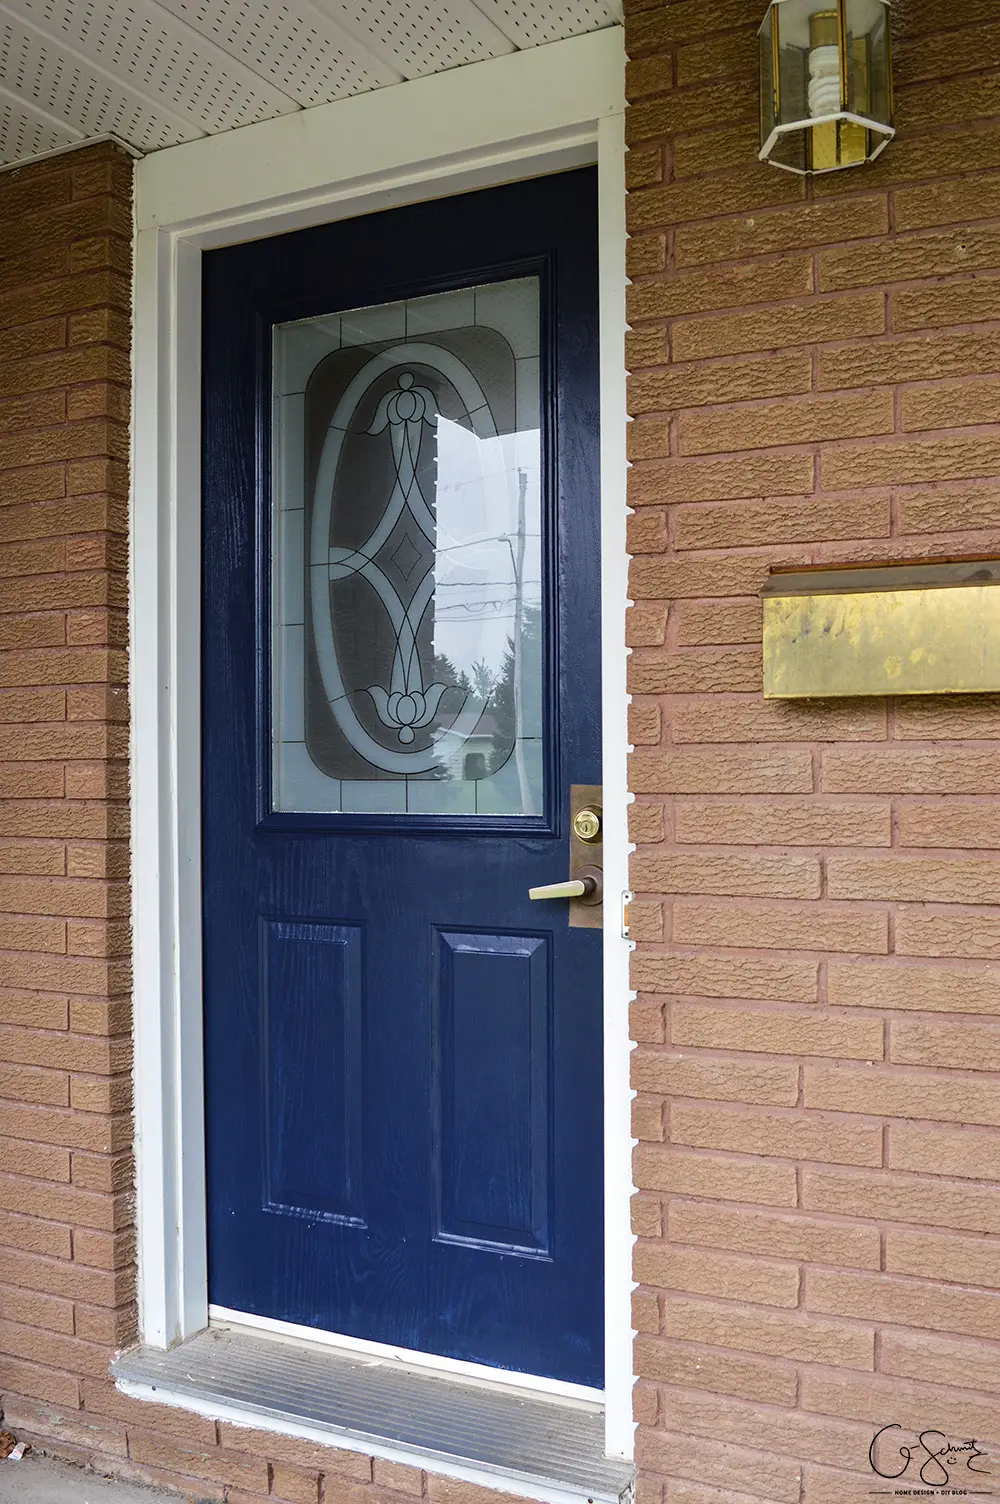 Thinking of updating your front door? In less than a day you can create some major impact for minimal effort. So go ahead and paint the front door any colour you want!